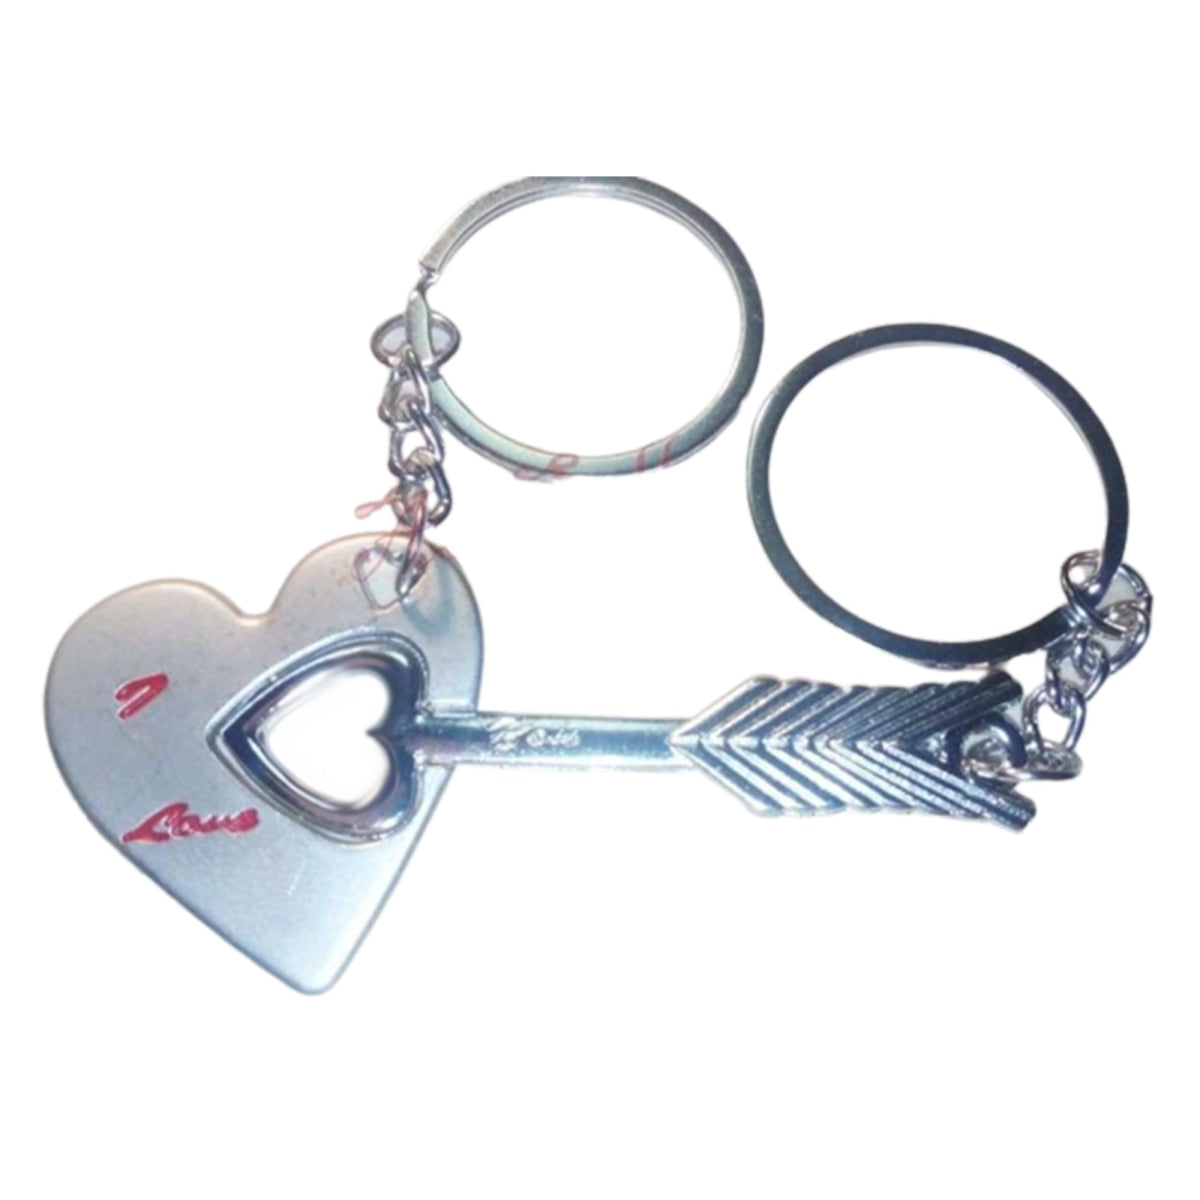 30Mm Pair Key Chains Silver Colour Arrow Love Heart Keyrings Ring Chain Couples Rings